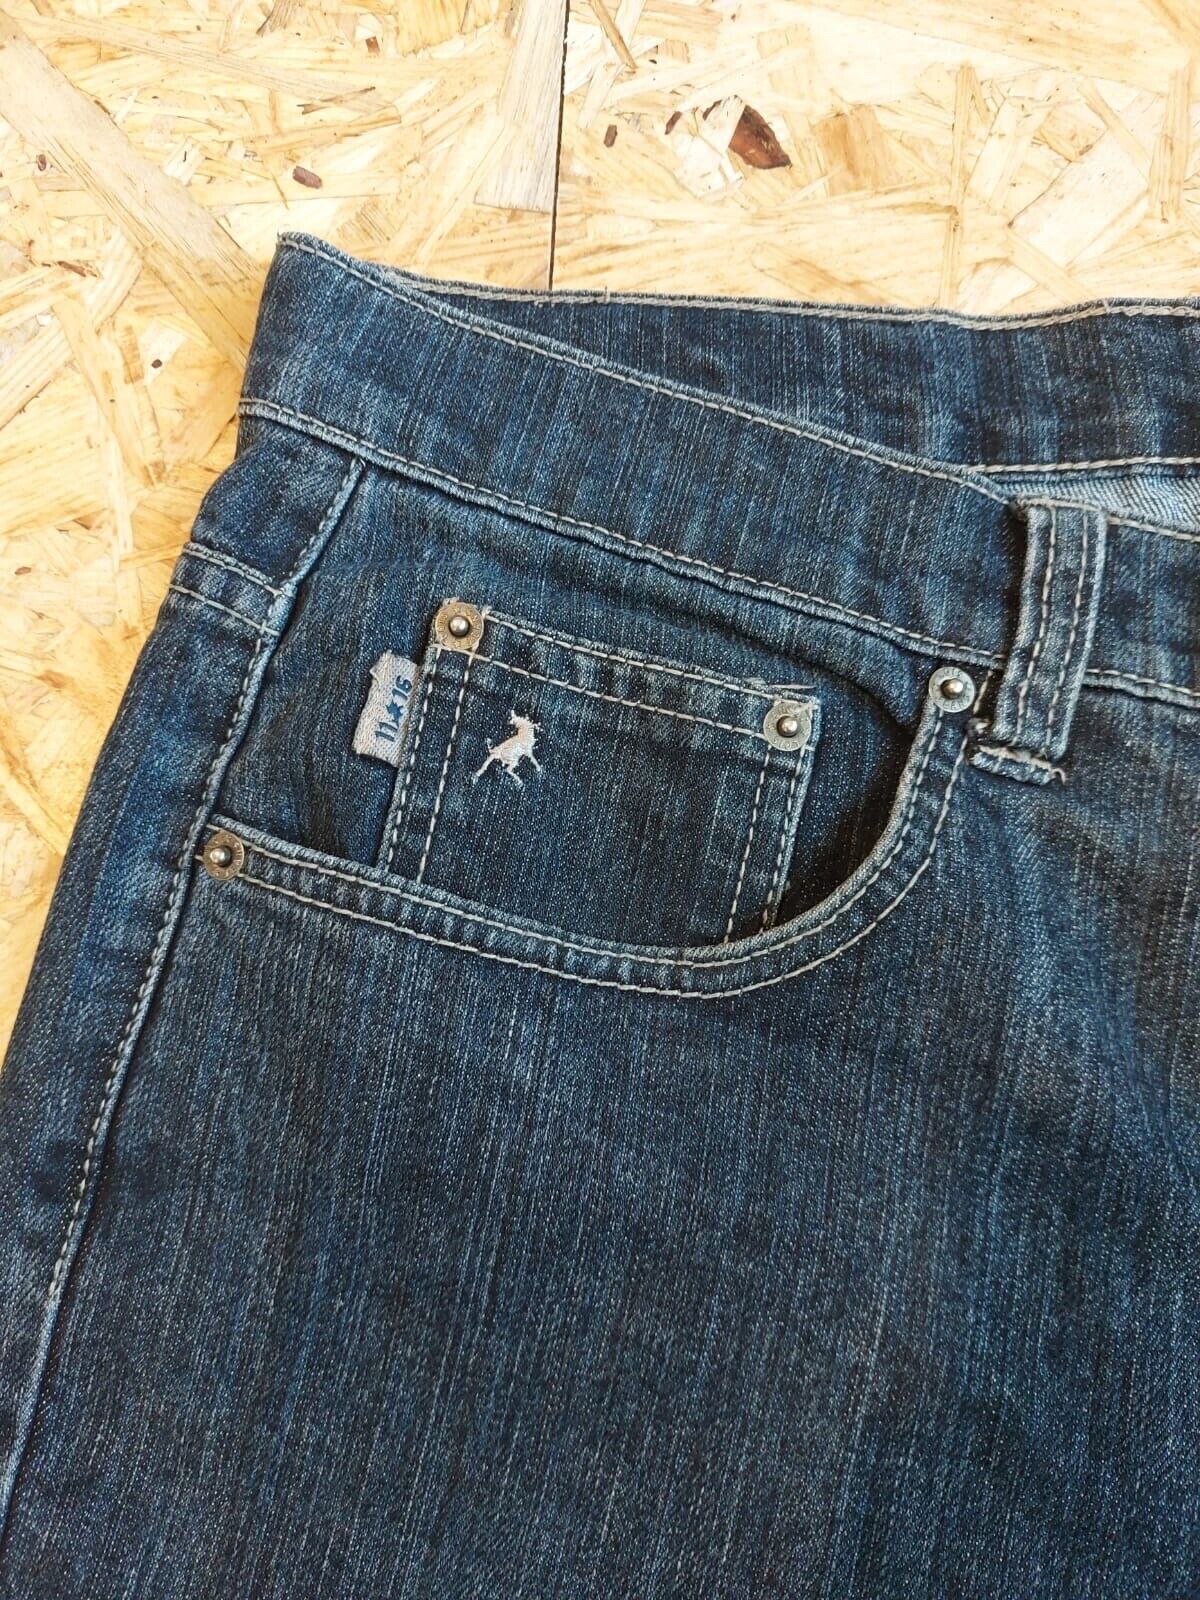 Lois Jeans - Terrace W32 L28 Straight Jeans Vintage Blue Wash - 80s casual Pearl